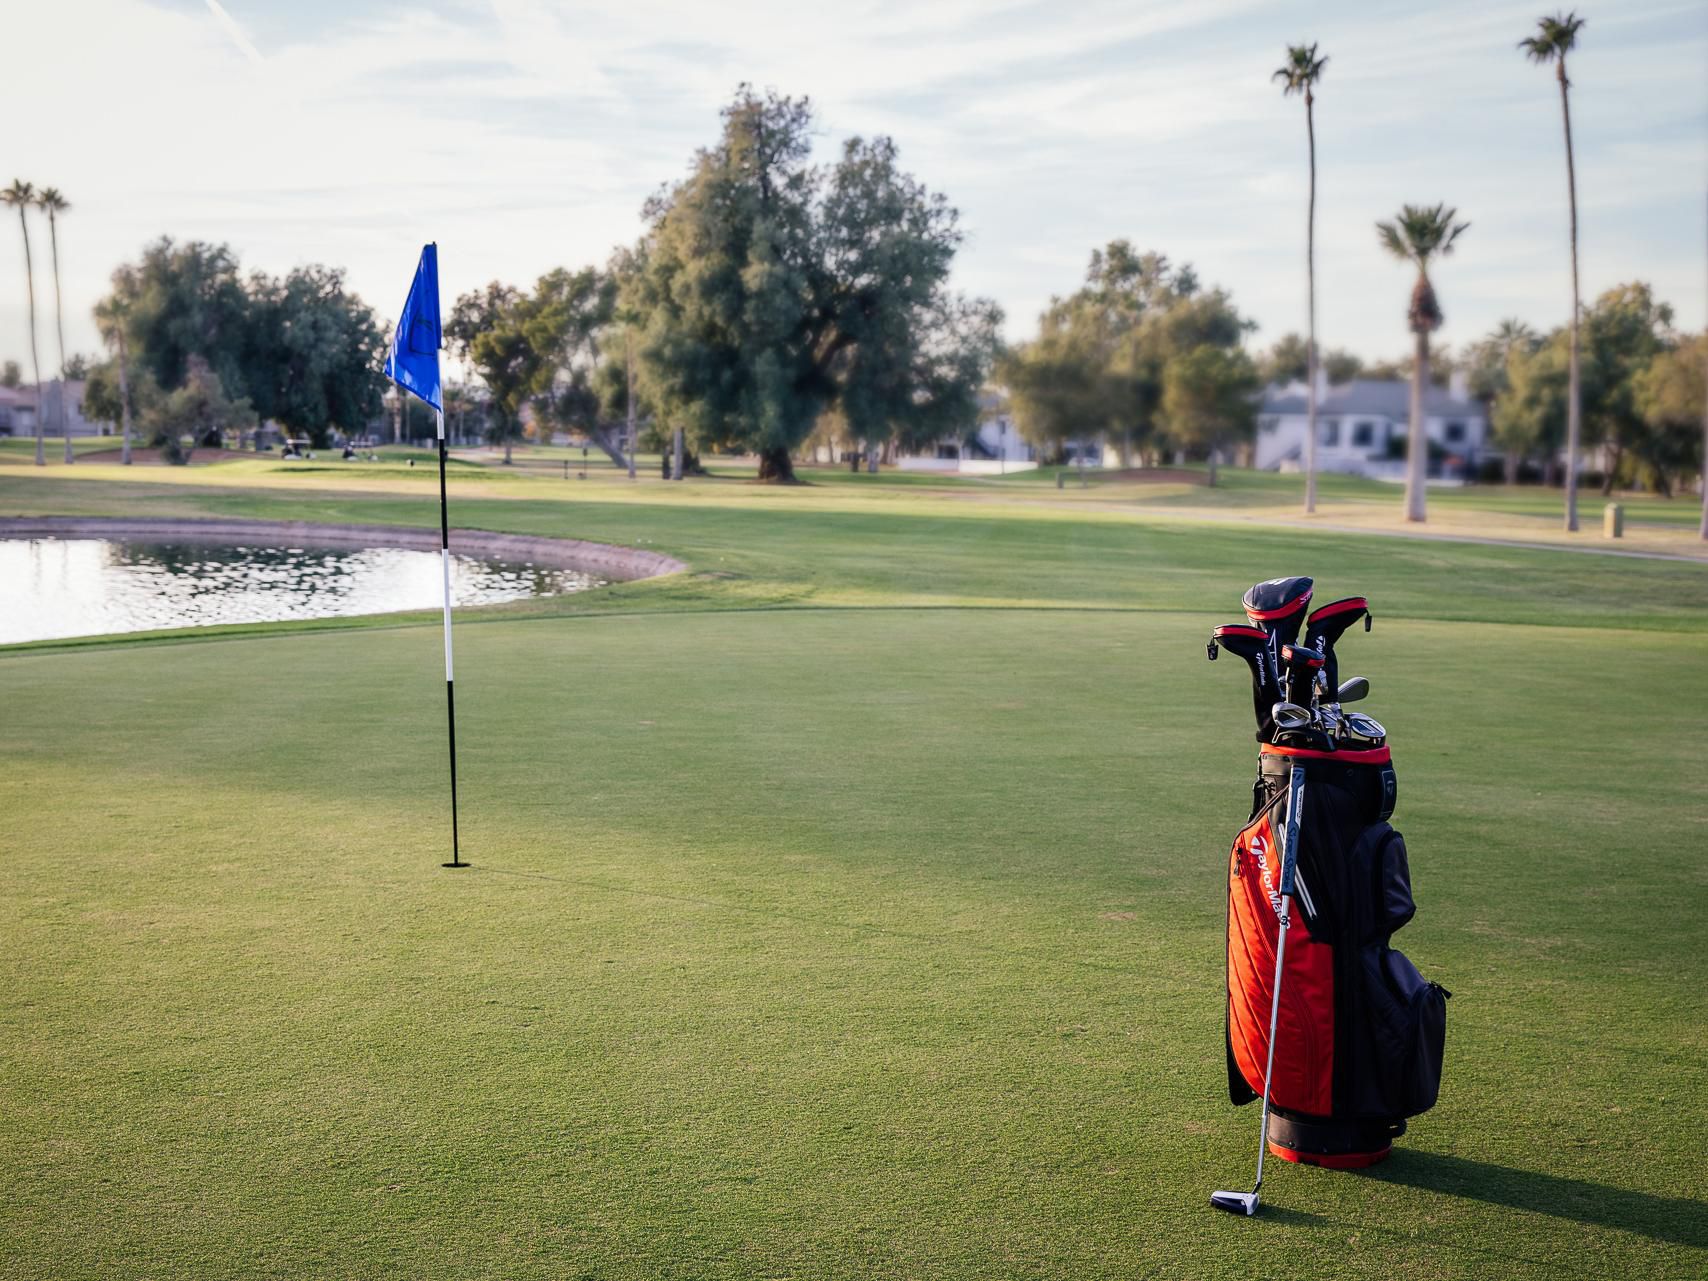 Our hotel is close to San Marcos's 18-hole golf course, so you can enjoy an afternoon on the green during your stay. After finishing up your workday, unwind with a round of golf, keep up with your workout routine at our Fitness Center, lounge by the beautiful outdoor pool with a relaxing hot tub, or warm up by the firepit.​